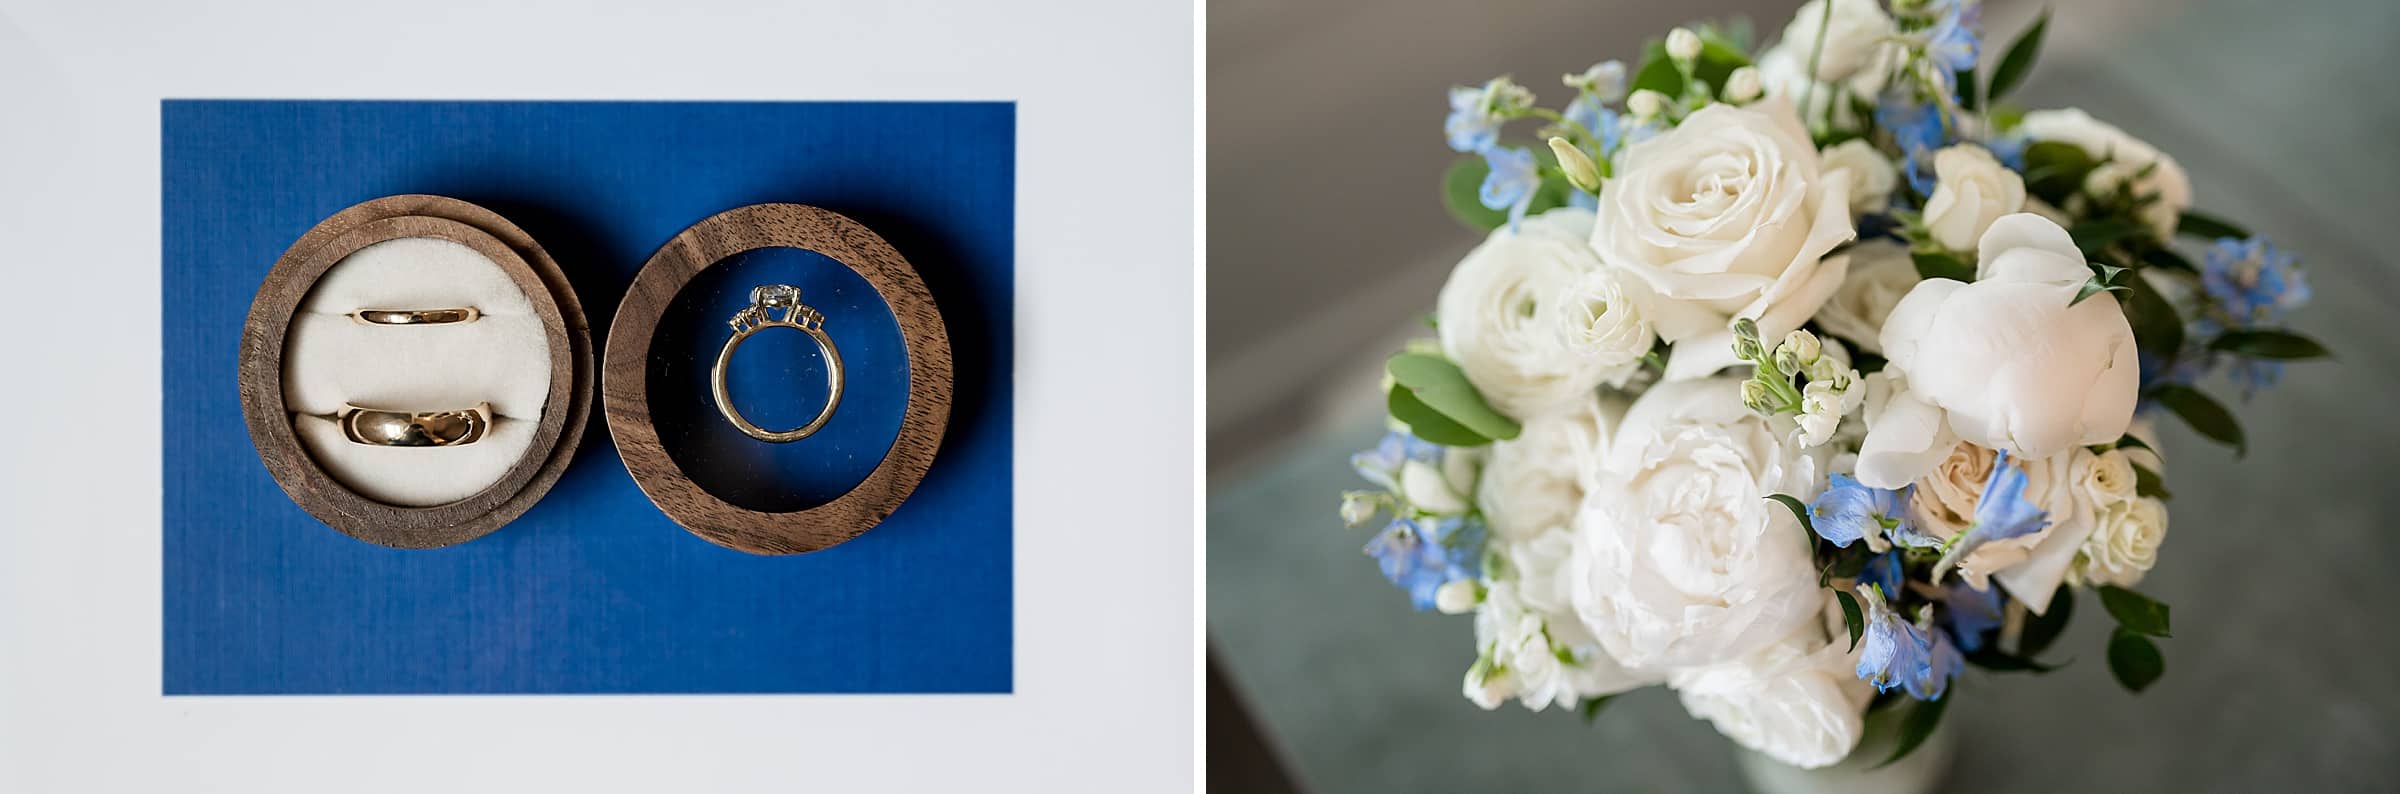 A pair of gold rings and a diamond ring in a wooden box sit on a blue background. Next to it, a bouquet of white and light blue flowers is placed on a table.